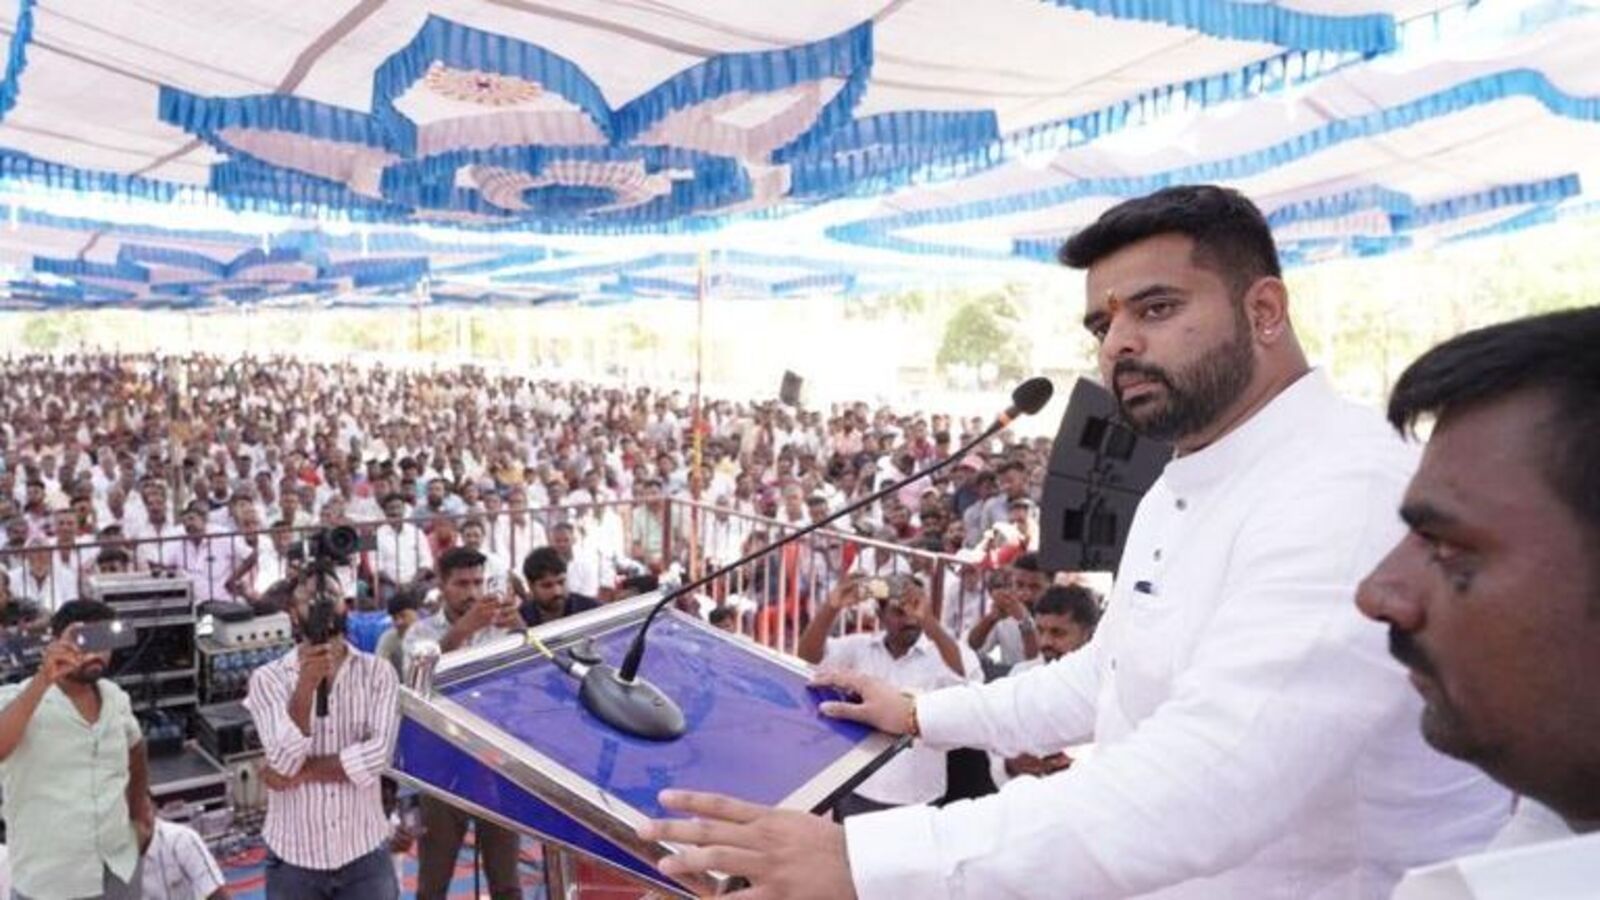 Prajwal Revanna case: ‘Morphed', Deve Gowda's grandson claims videos circulated to ‘tarnish image’